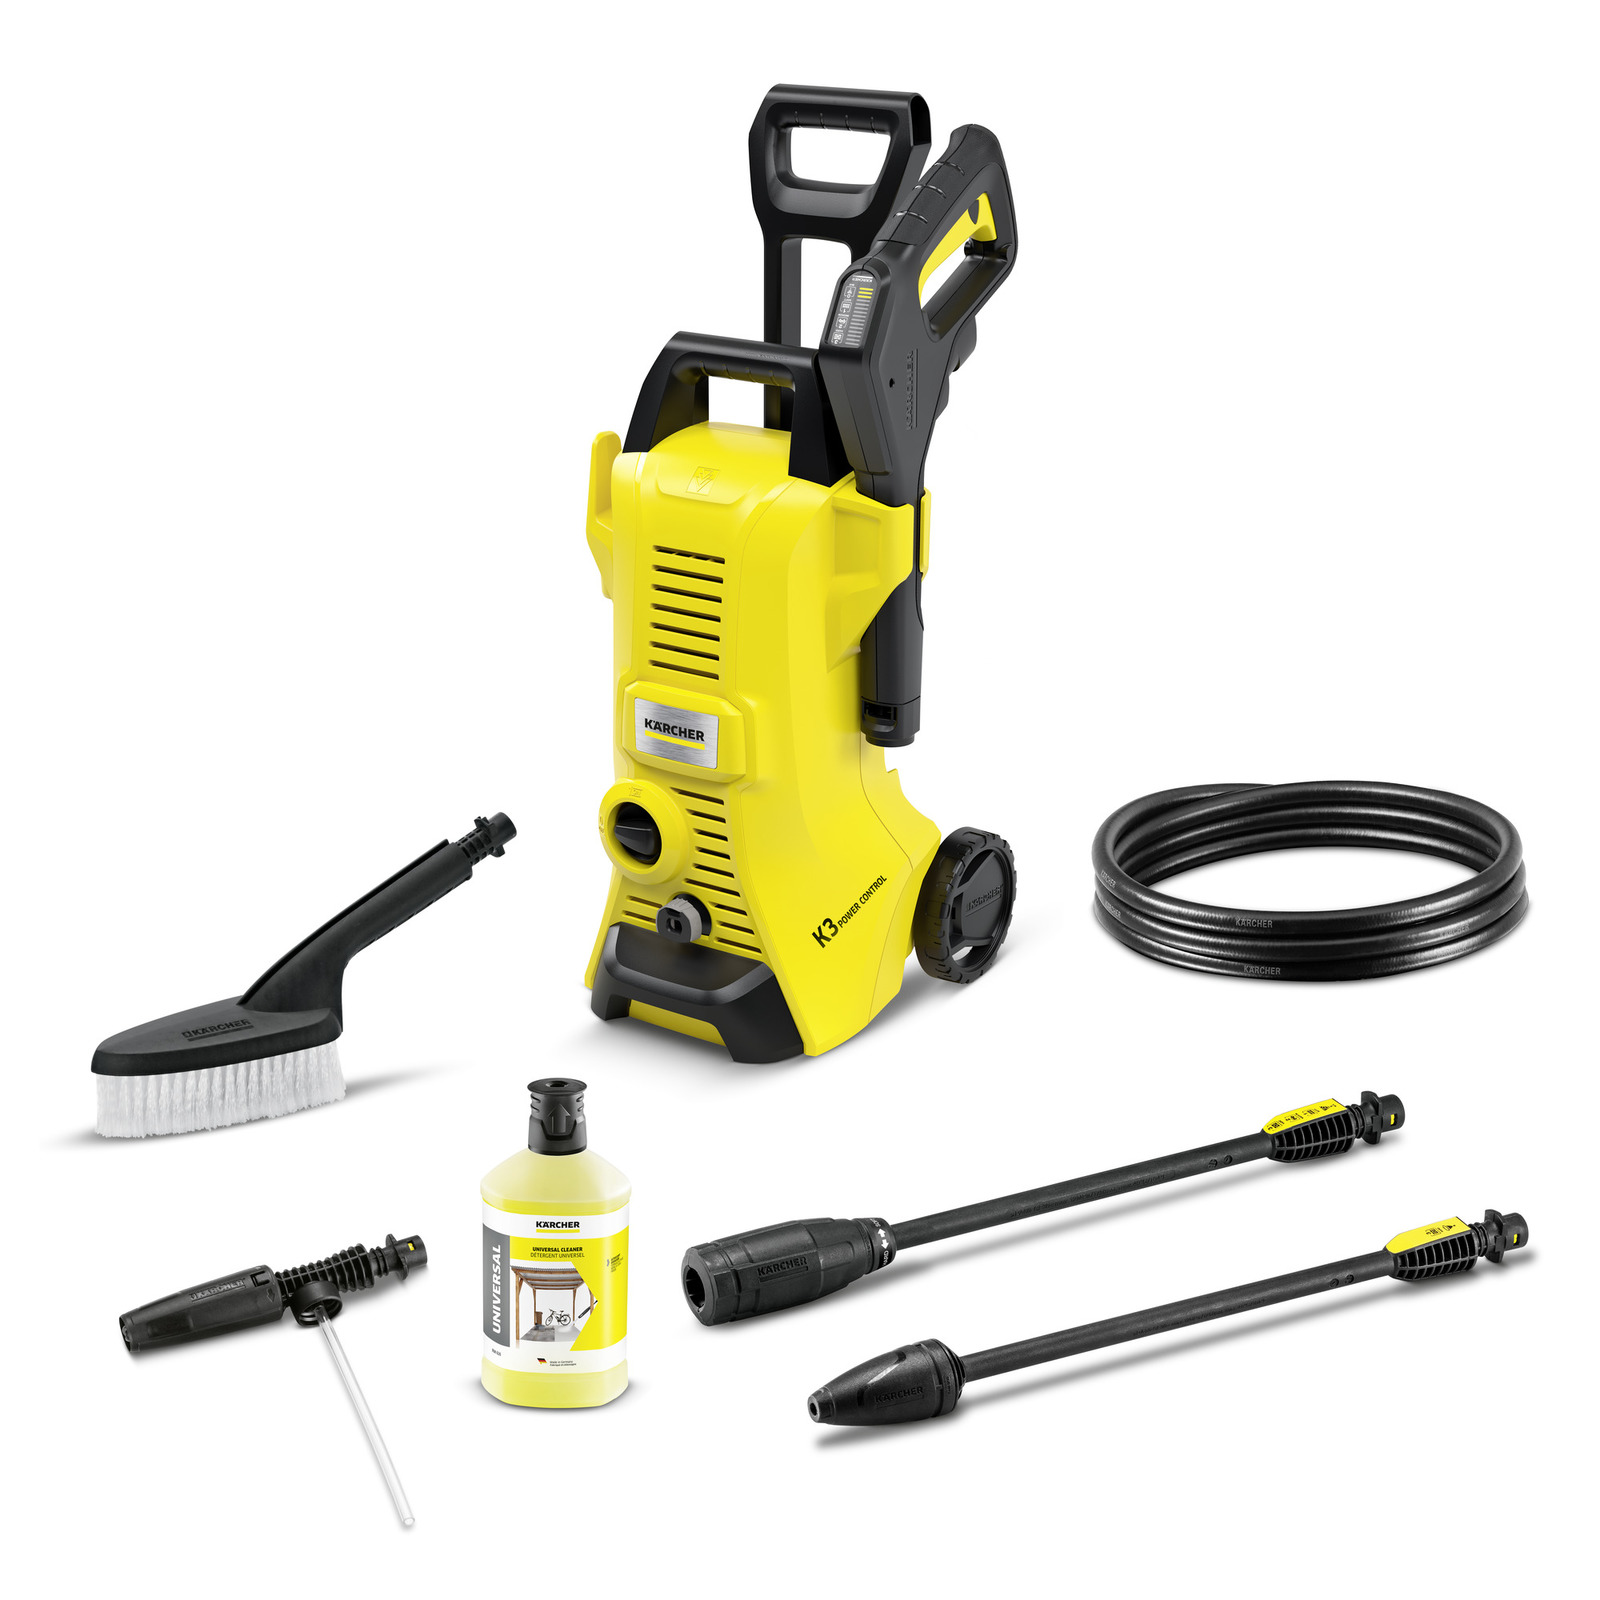 Is this Karcher K 2 Entry pressure washer any good? : r/AutoDetailing